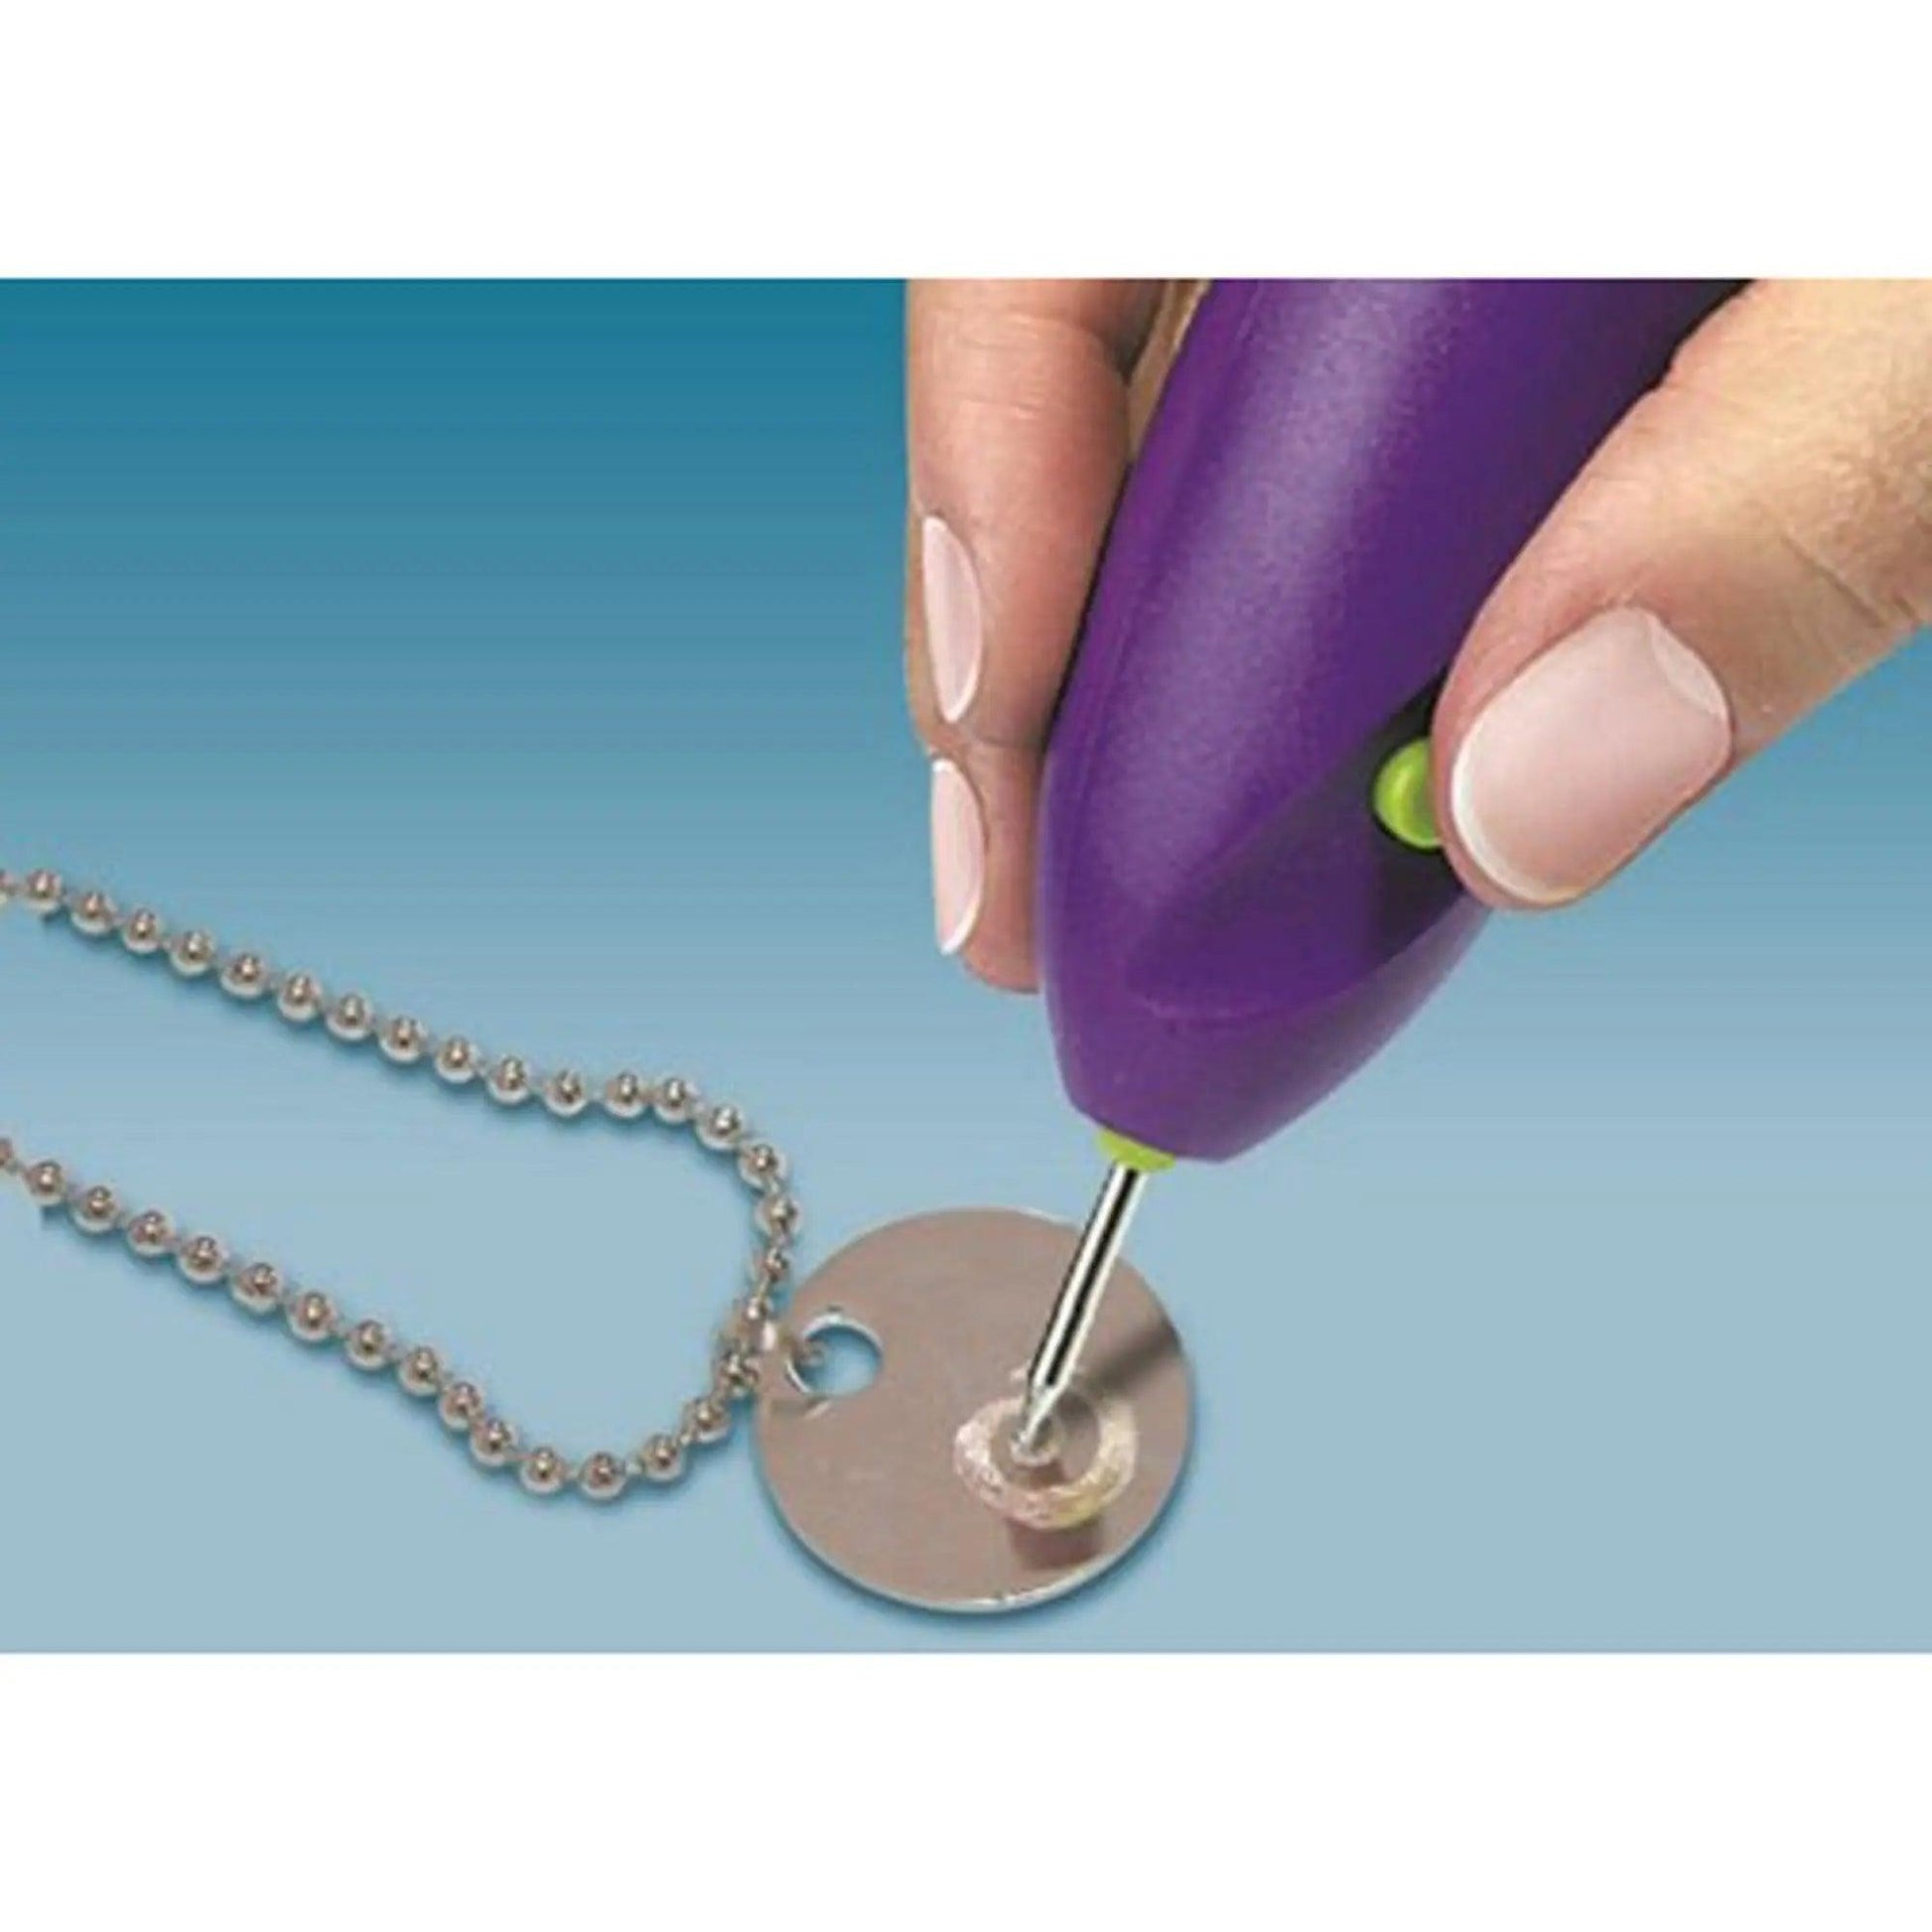 Etch-a-Tag Engraver: Creative Metal Engraving Tool | For 9 to 13 years Small World Toys